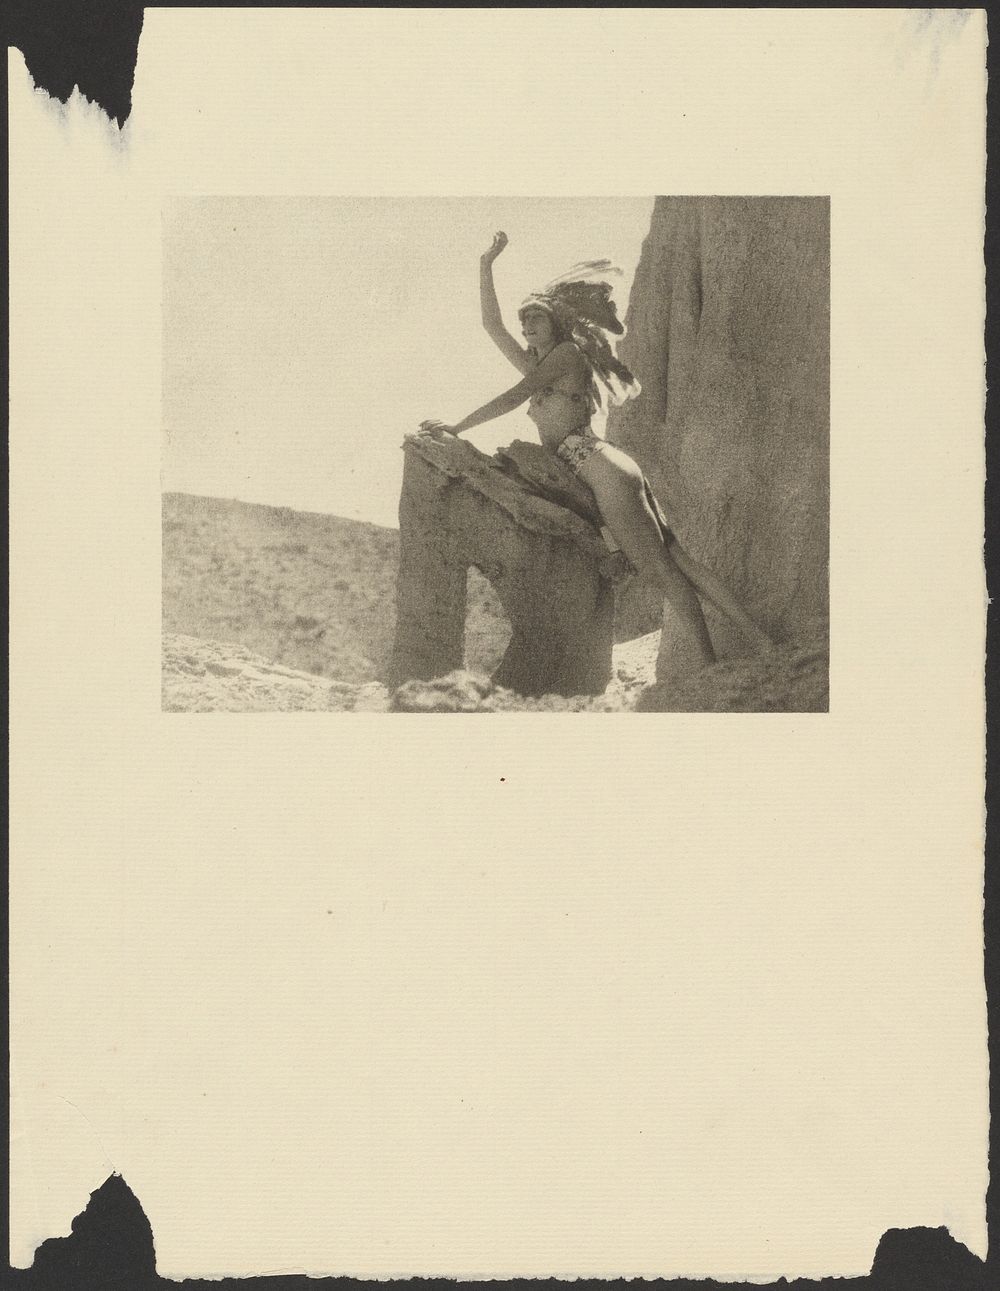 Woman Dressed in Indian Costume in the Desert by Arthur F Kales